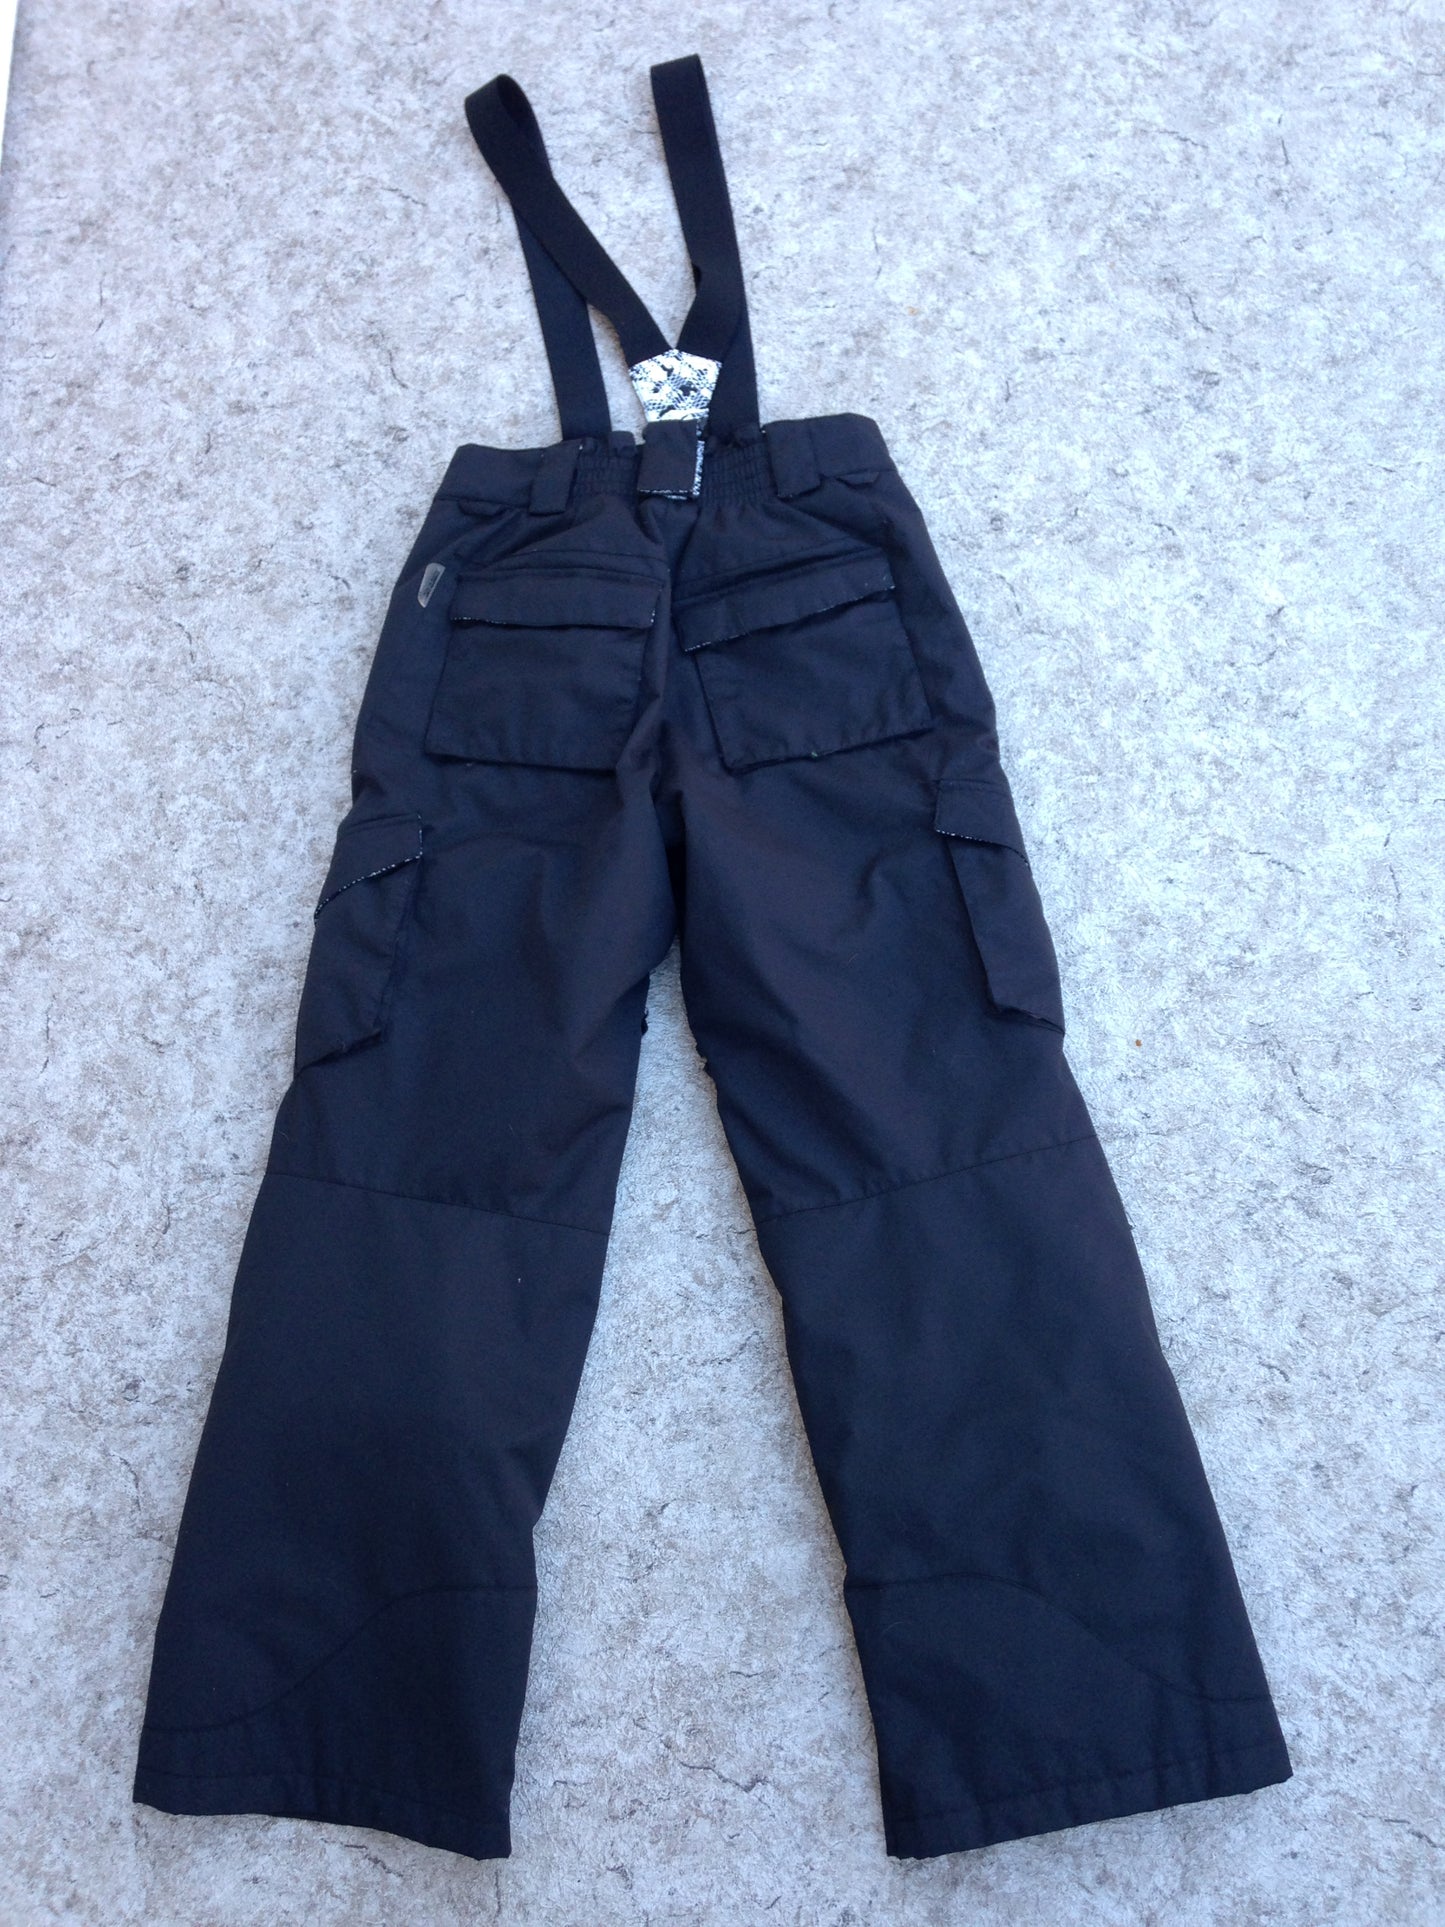 Snow Pants Child Size 10-12 Board Dokter Snowboarding With Removeable Straps Adjustable Waist Black New Demo Model